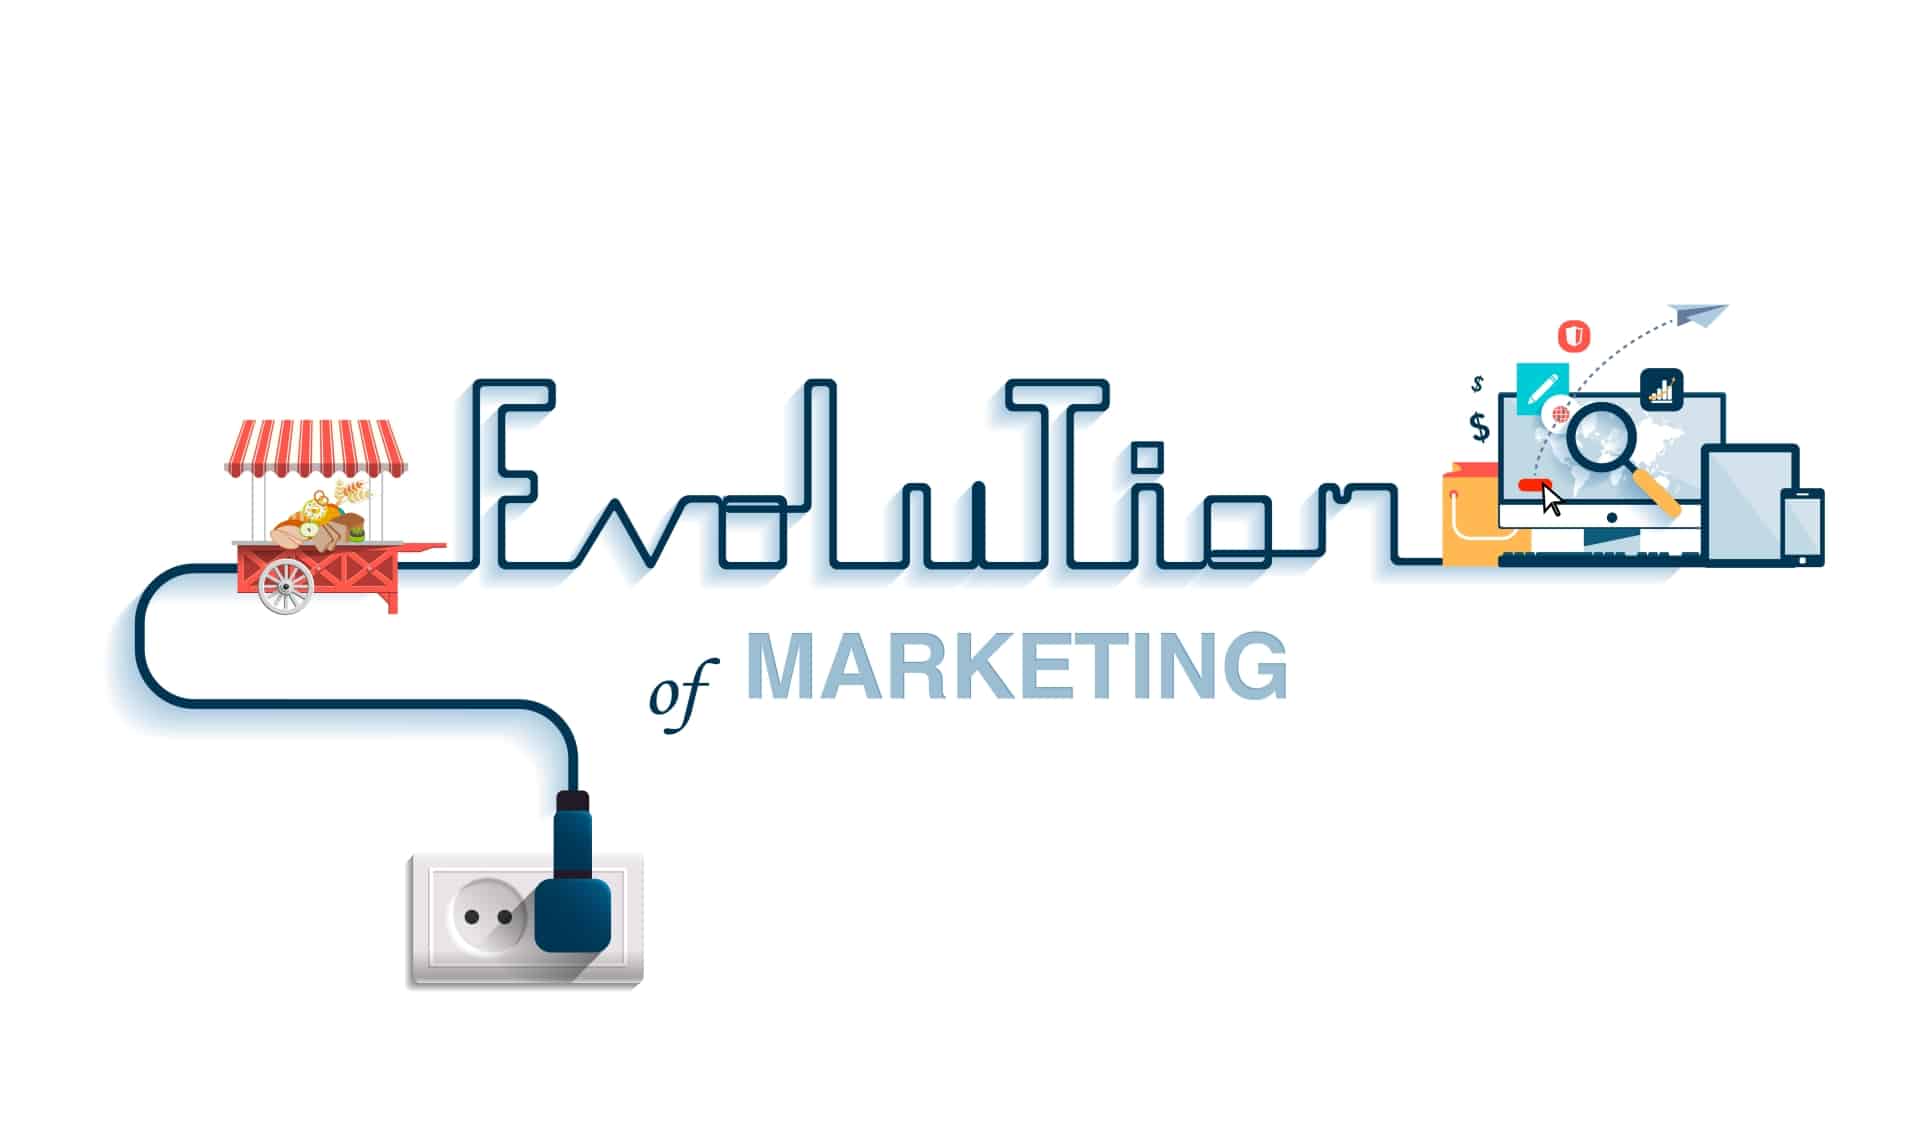 The-Evolution-of-Marketing-scaled